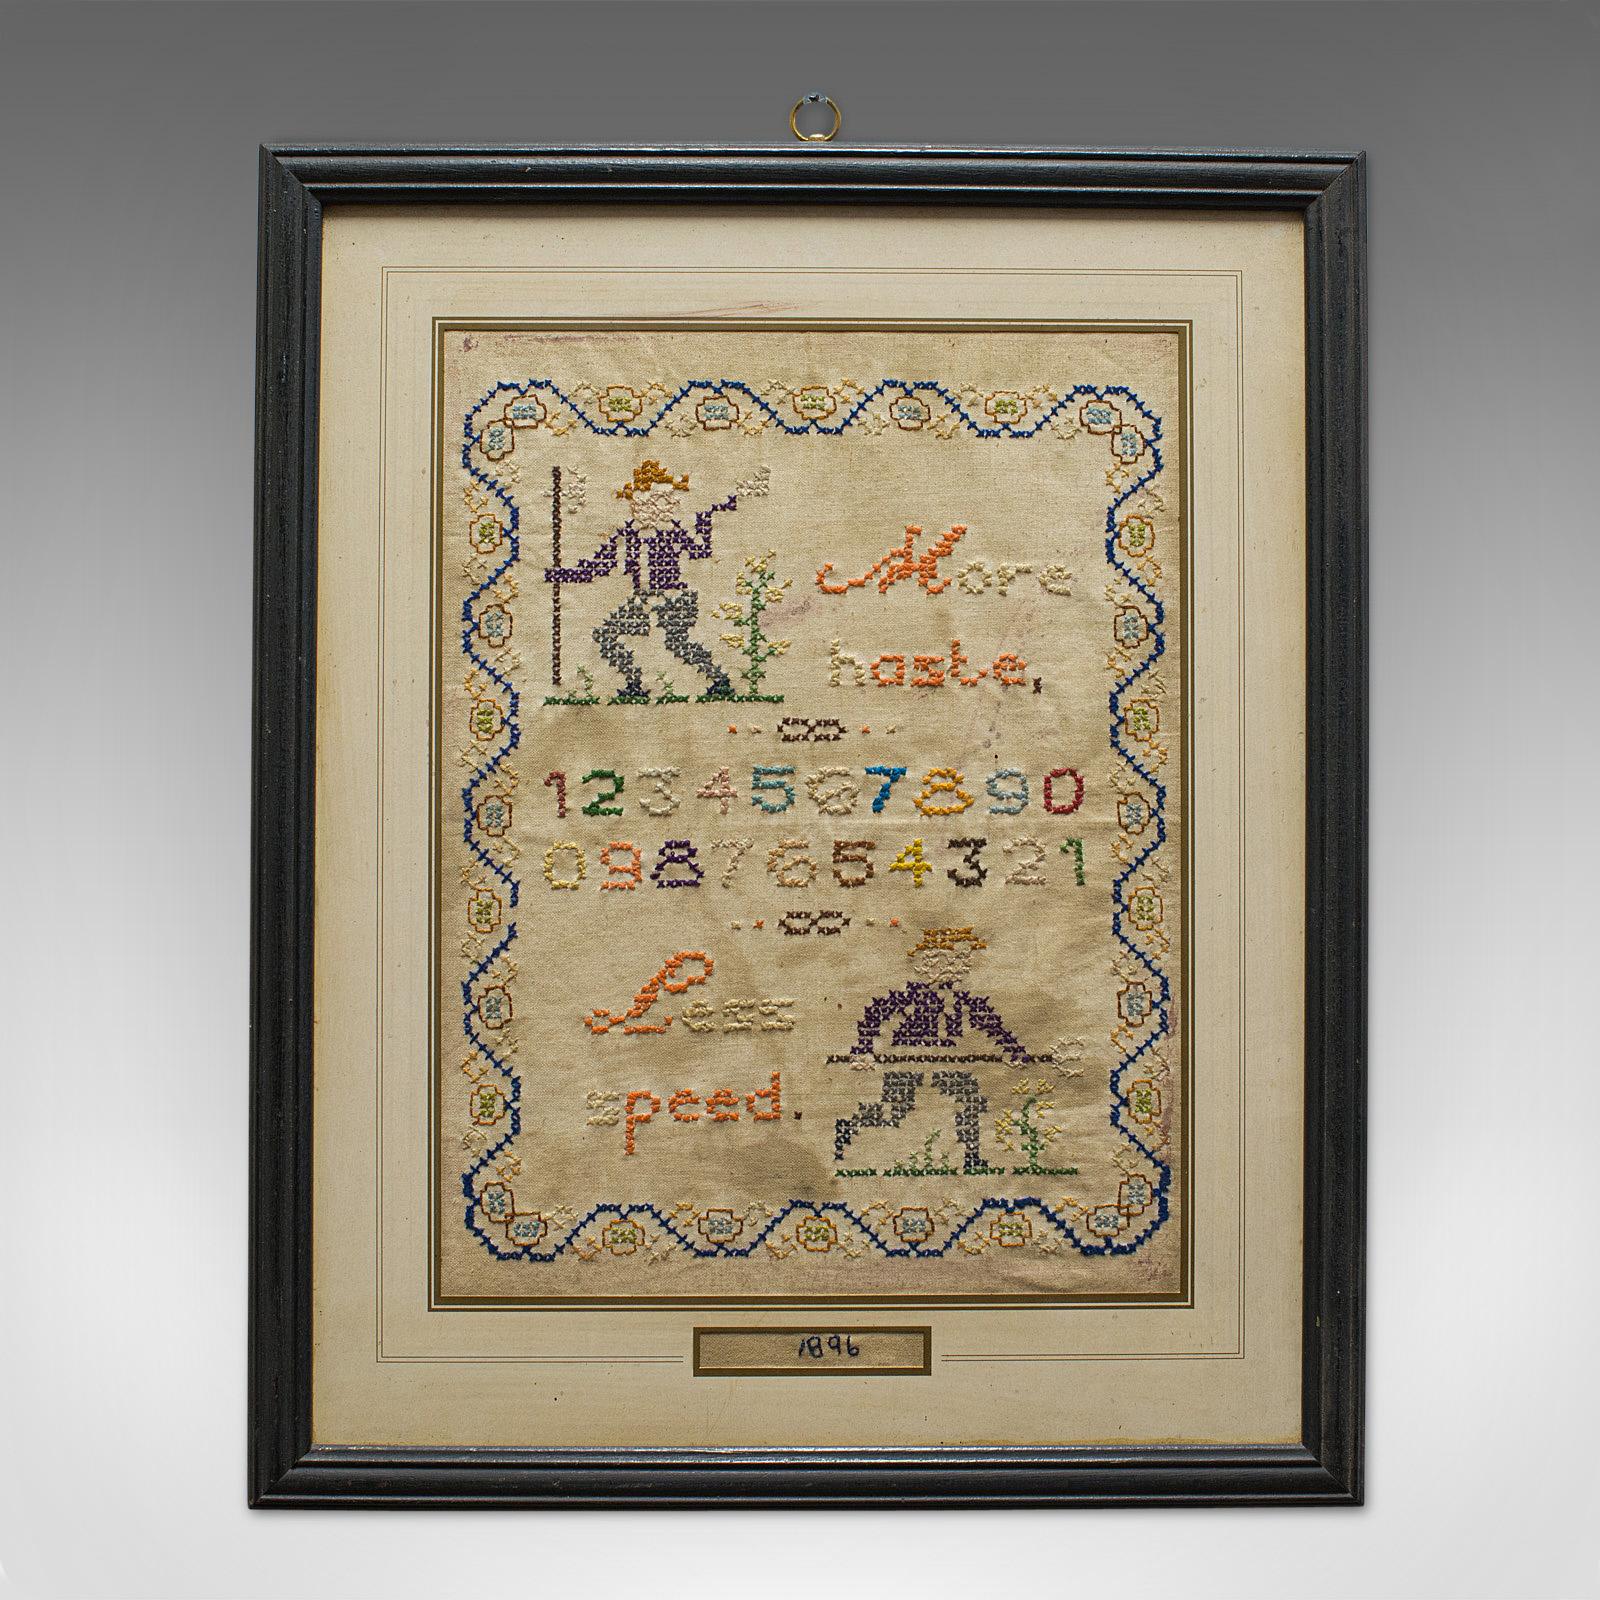 This is an antique framed sampler. An English, cross-stitch apprentice piece from the late Victorian period, dated to 1896.

Sought after Victorian sampler
Displays a desirable aged patina
Hessian cloth with colorful cross-stiched thread
Small